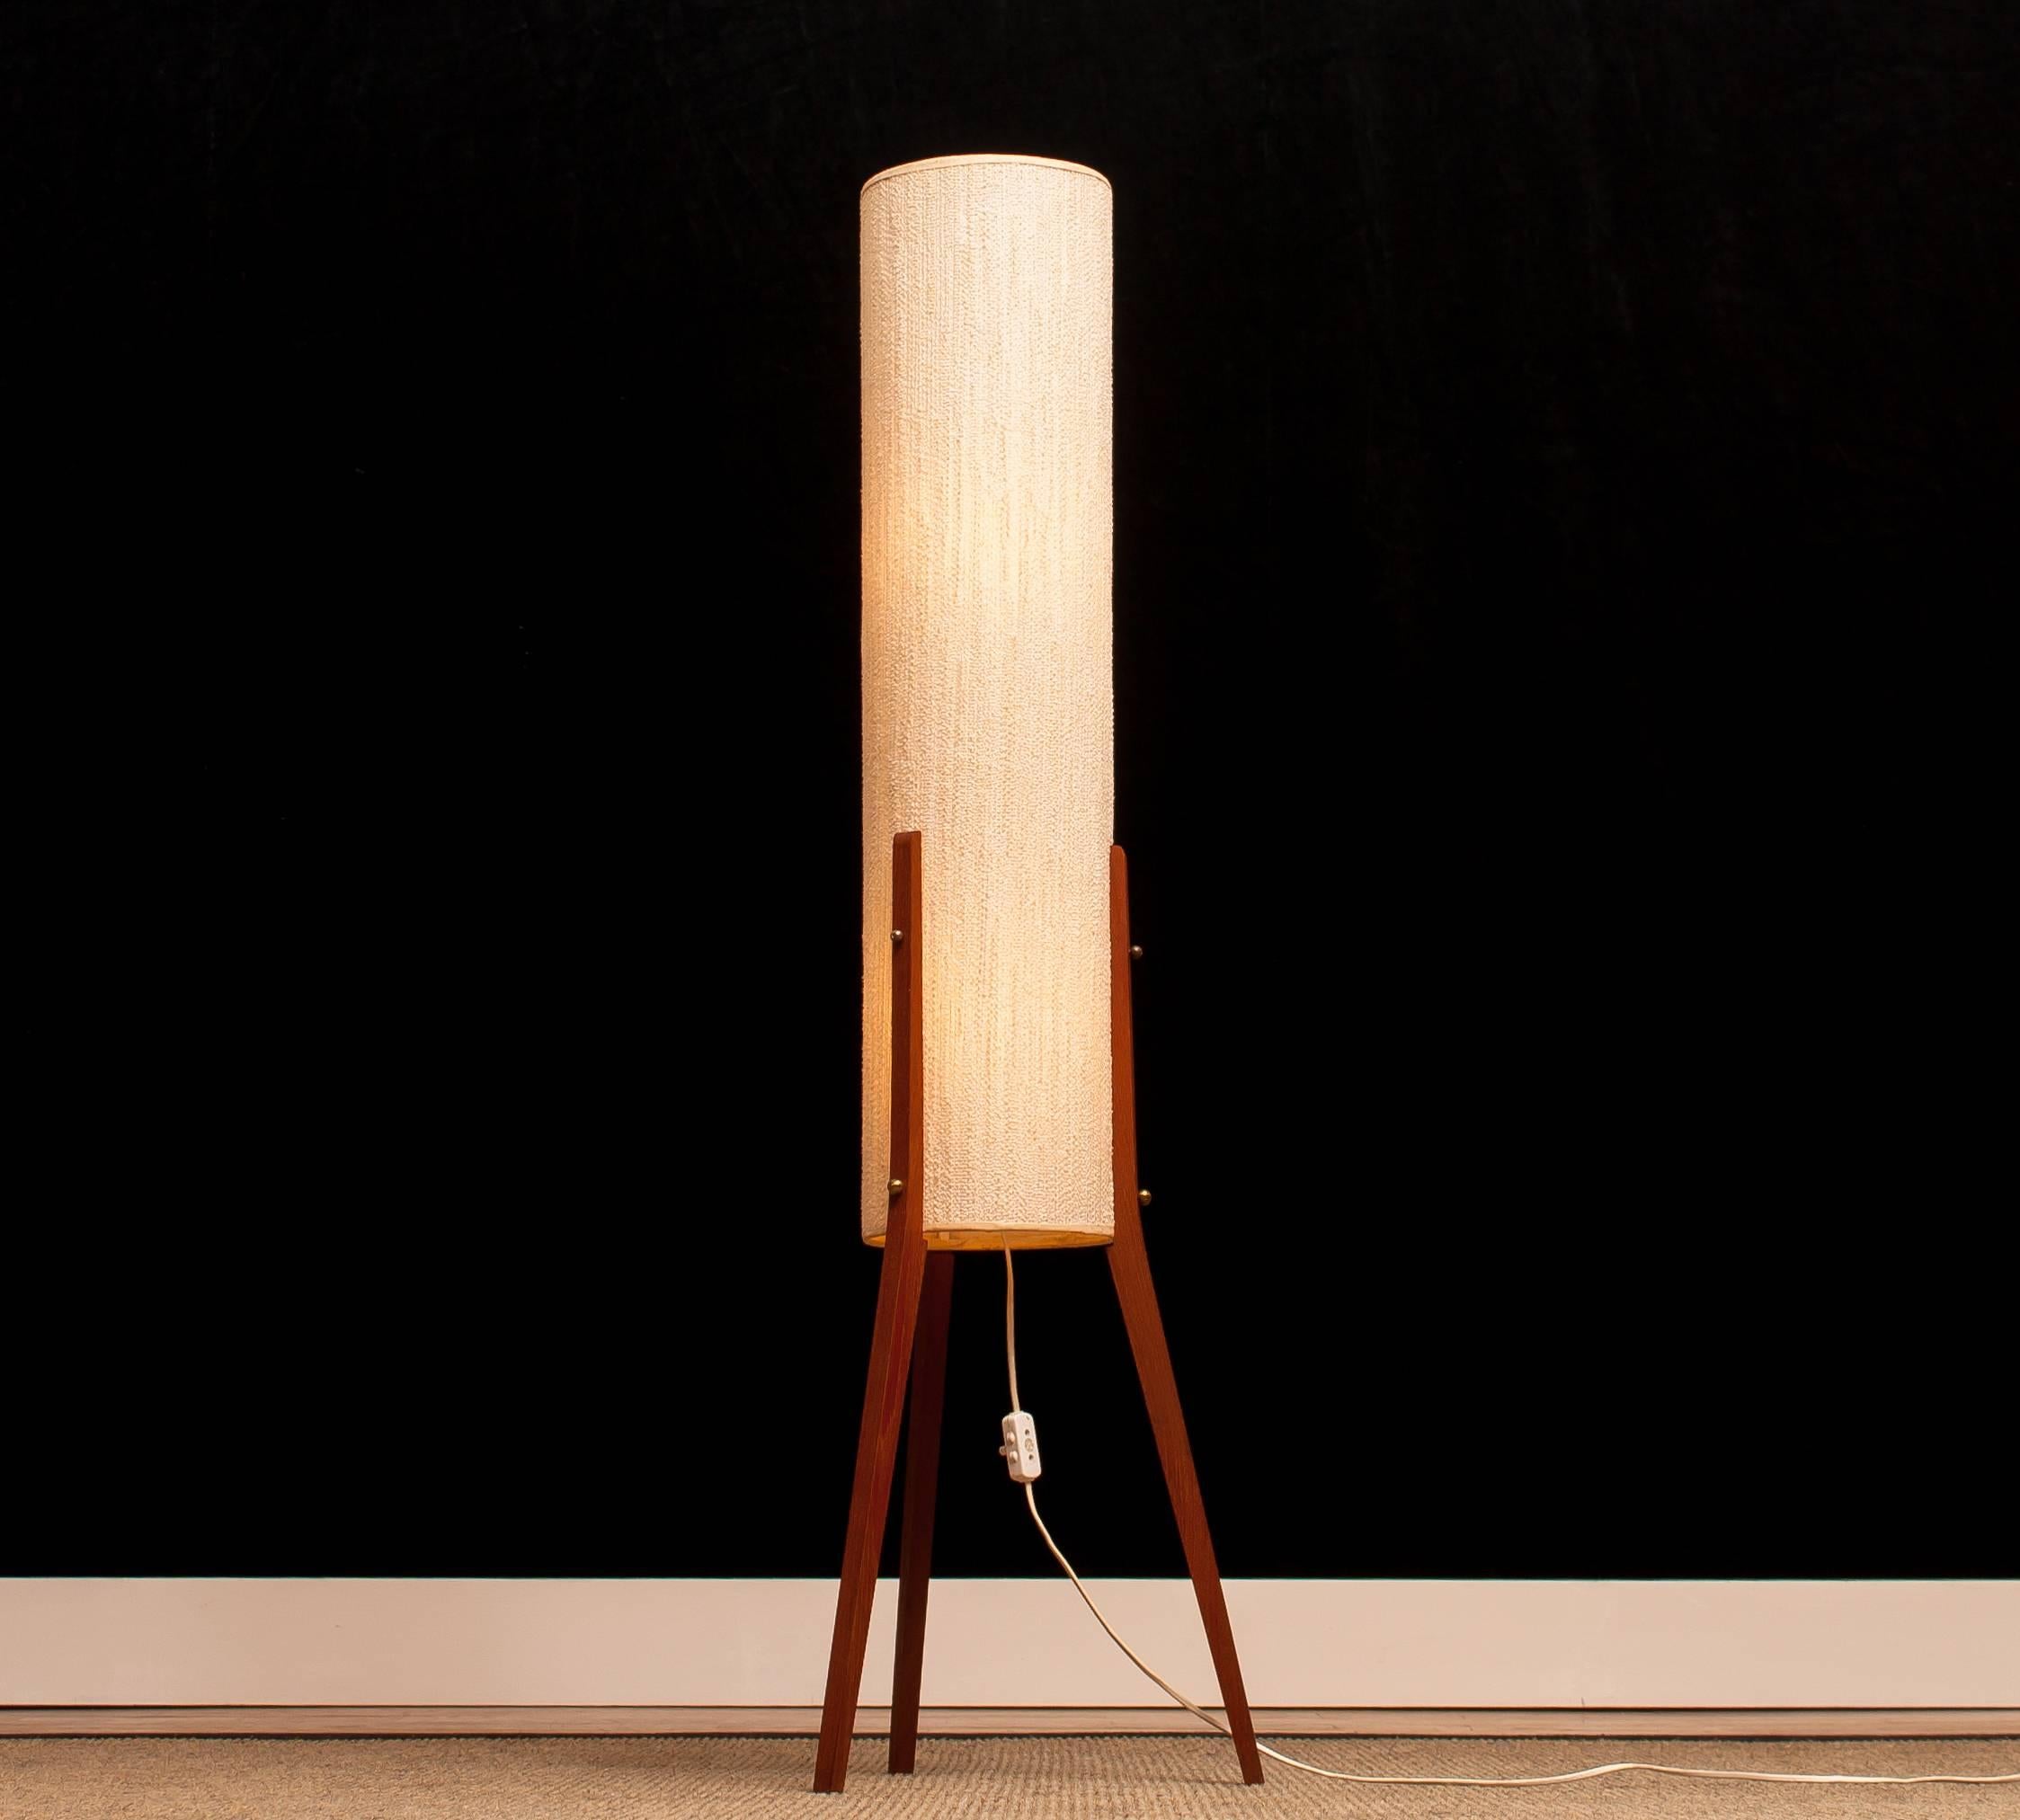 Wonderful large floor lamp made by Fog & Mørup, Denmark.
This lamp has a shade made of chenille on a teak Stand.
It is in a beautiful condition.
Period 1960s
Dimensions: H 120 cm, ø 35 cm.